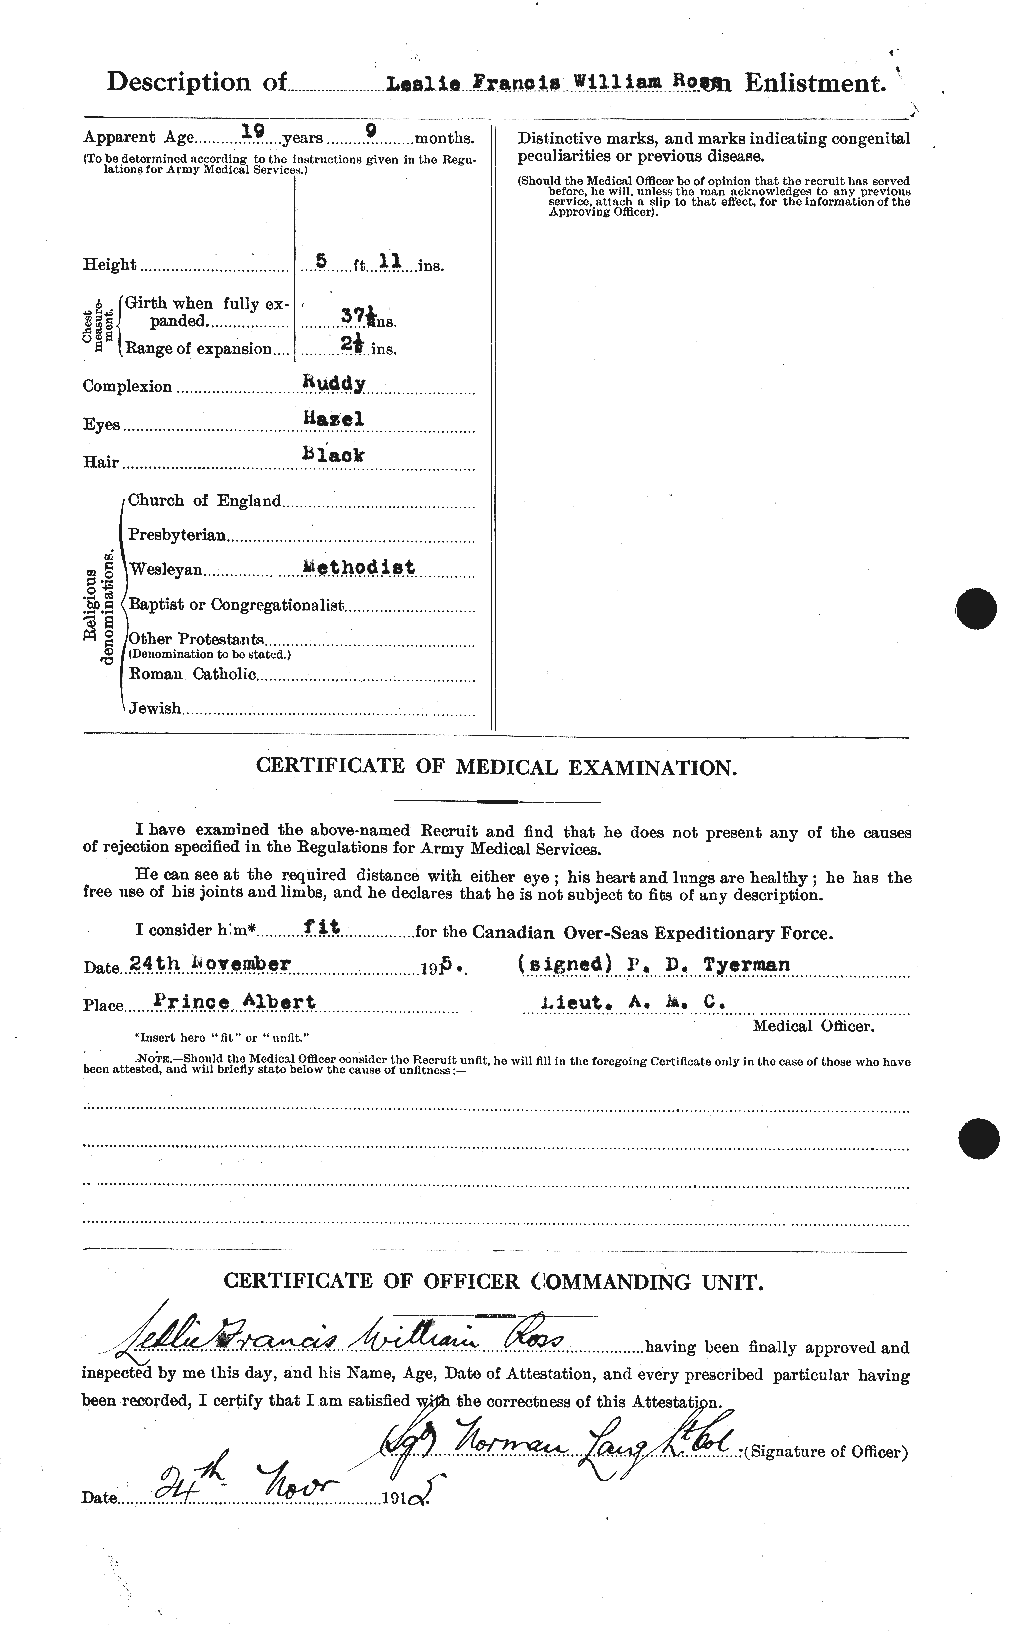 Personnel Records of the First World War - CEF 614991b